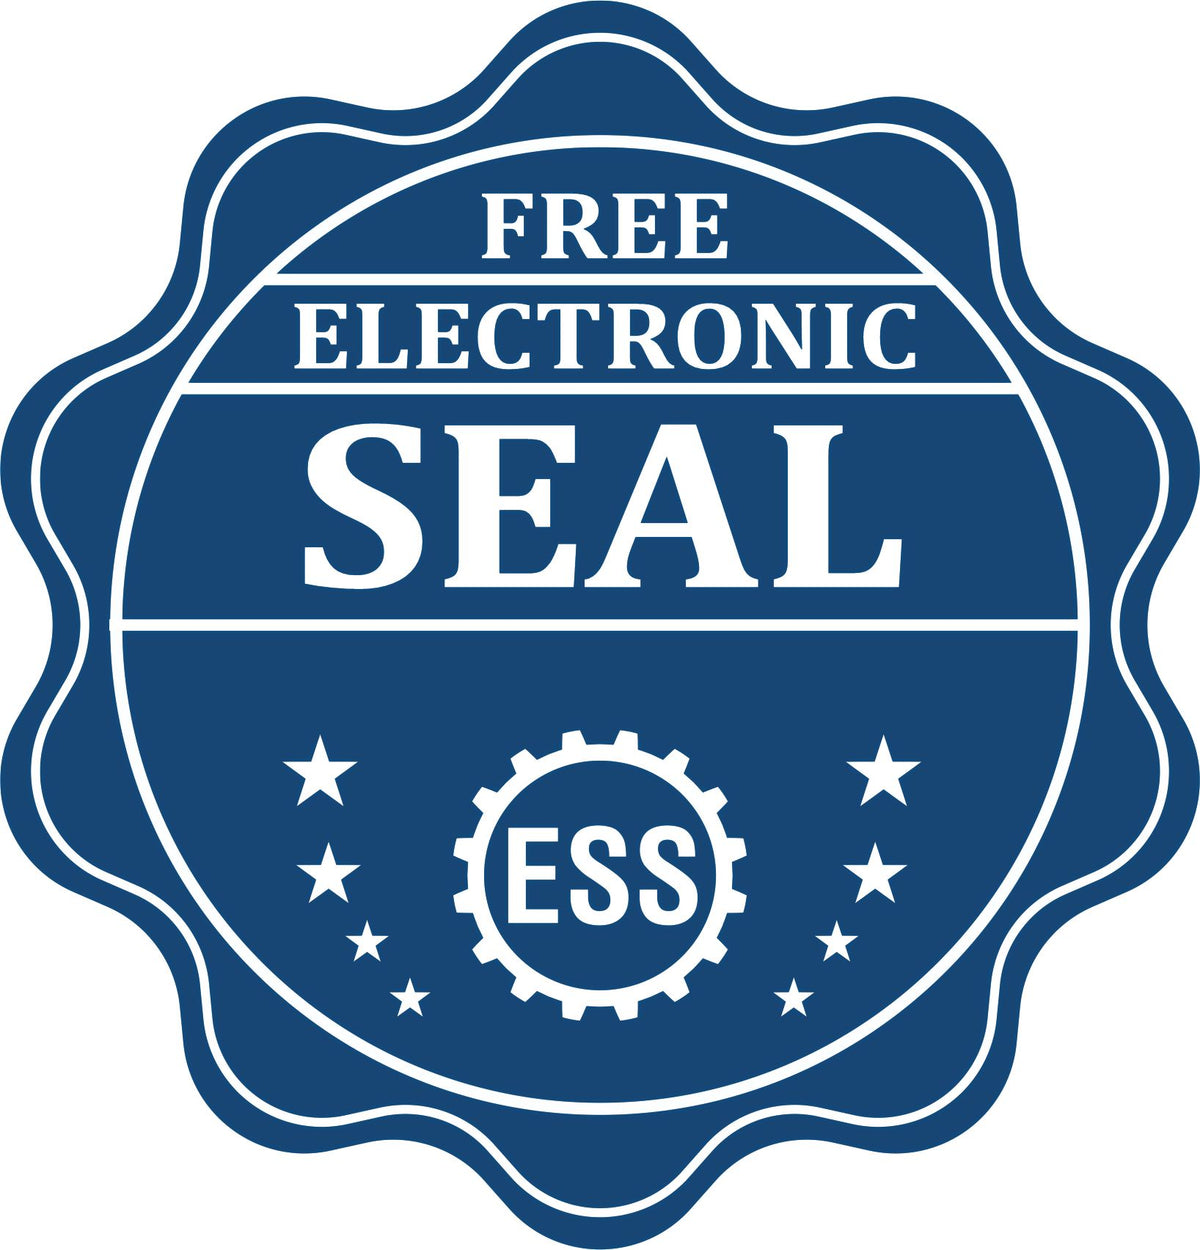 A badge showing a free electronic seal for the MaxLight Premium Pre-Inked Kentucky State Seal Notarial Stamp with stars and the ESS gear on the emblem.